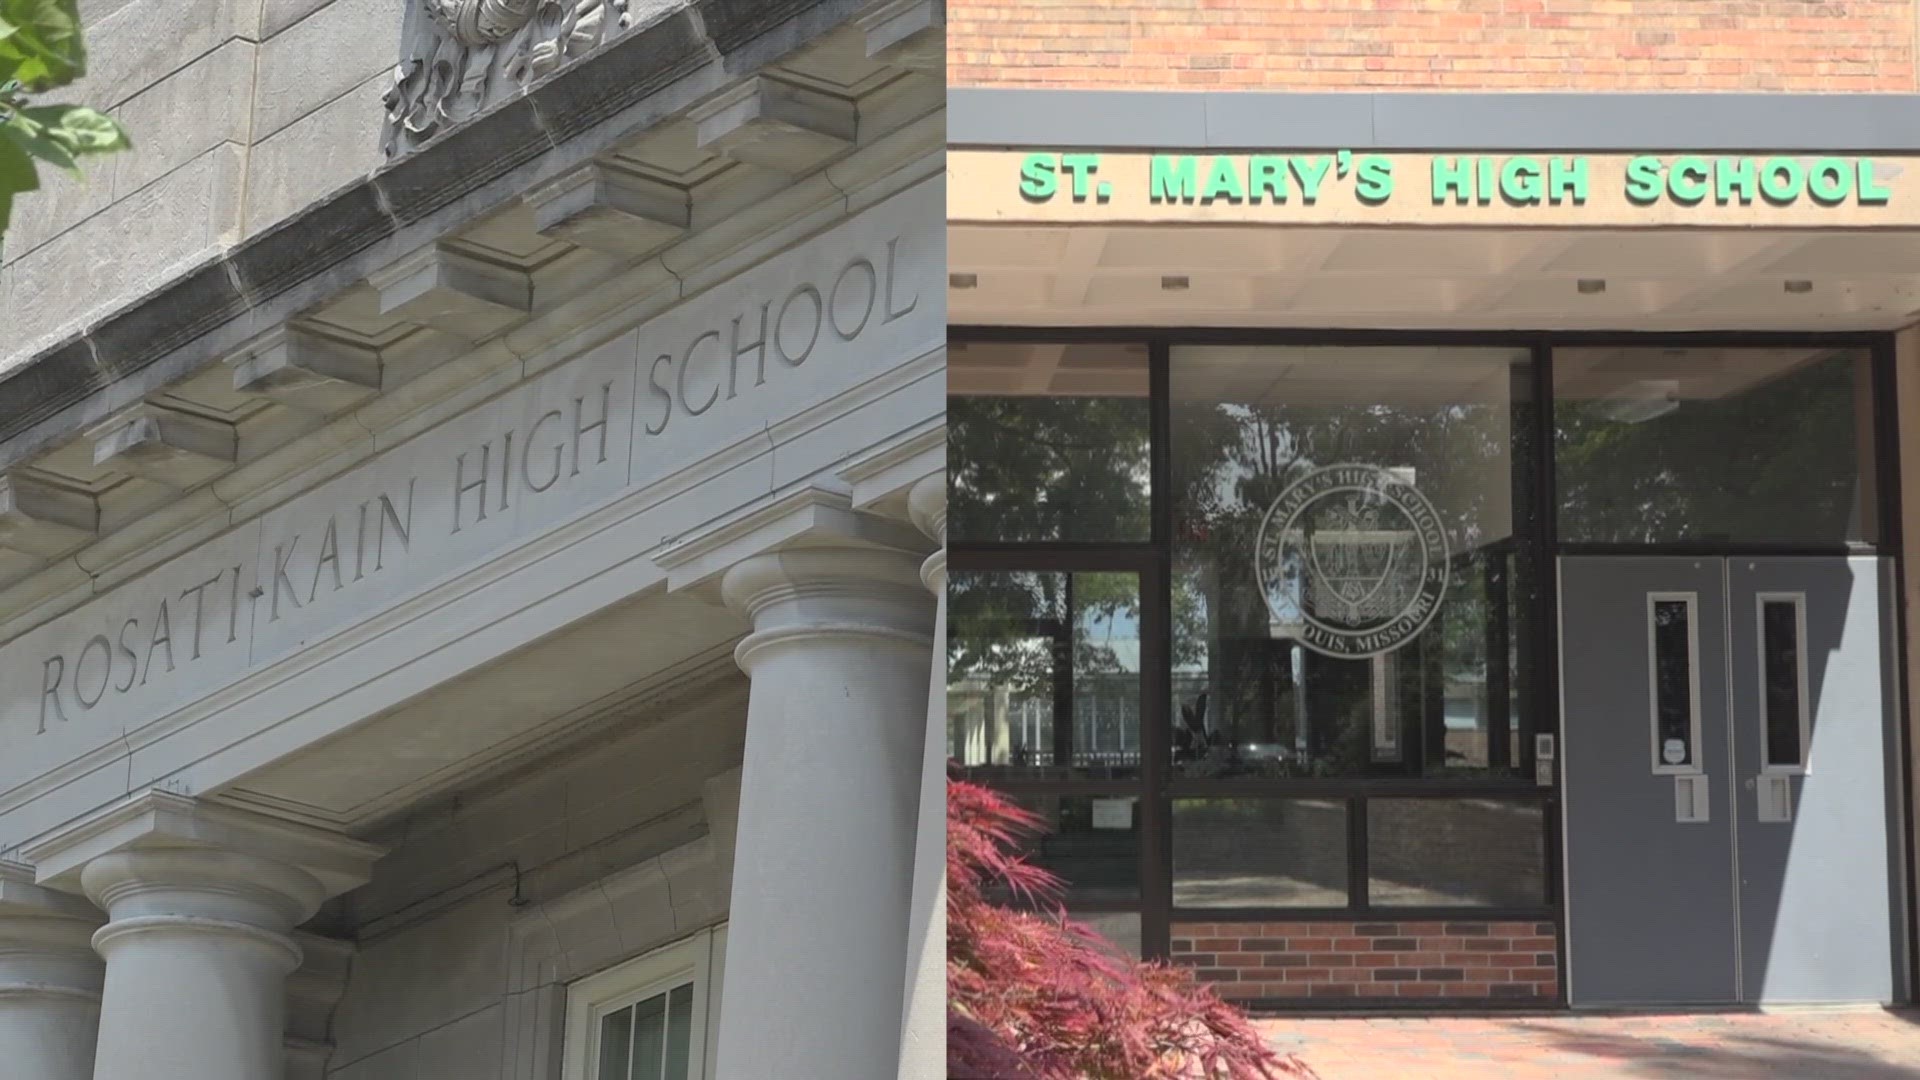 On July 1, both schools will become independent of the Archdiocese of St. Louis. This comes after the Archdiocese planned to close the schools.